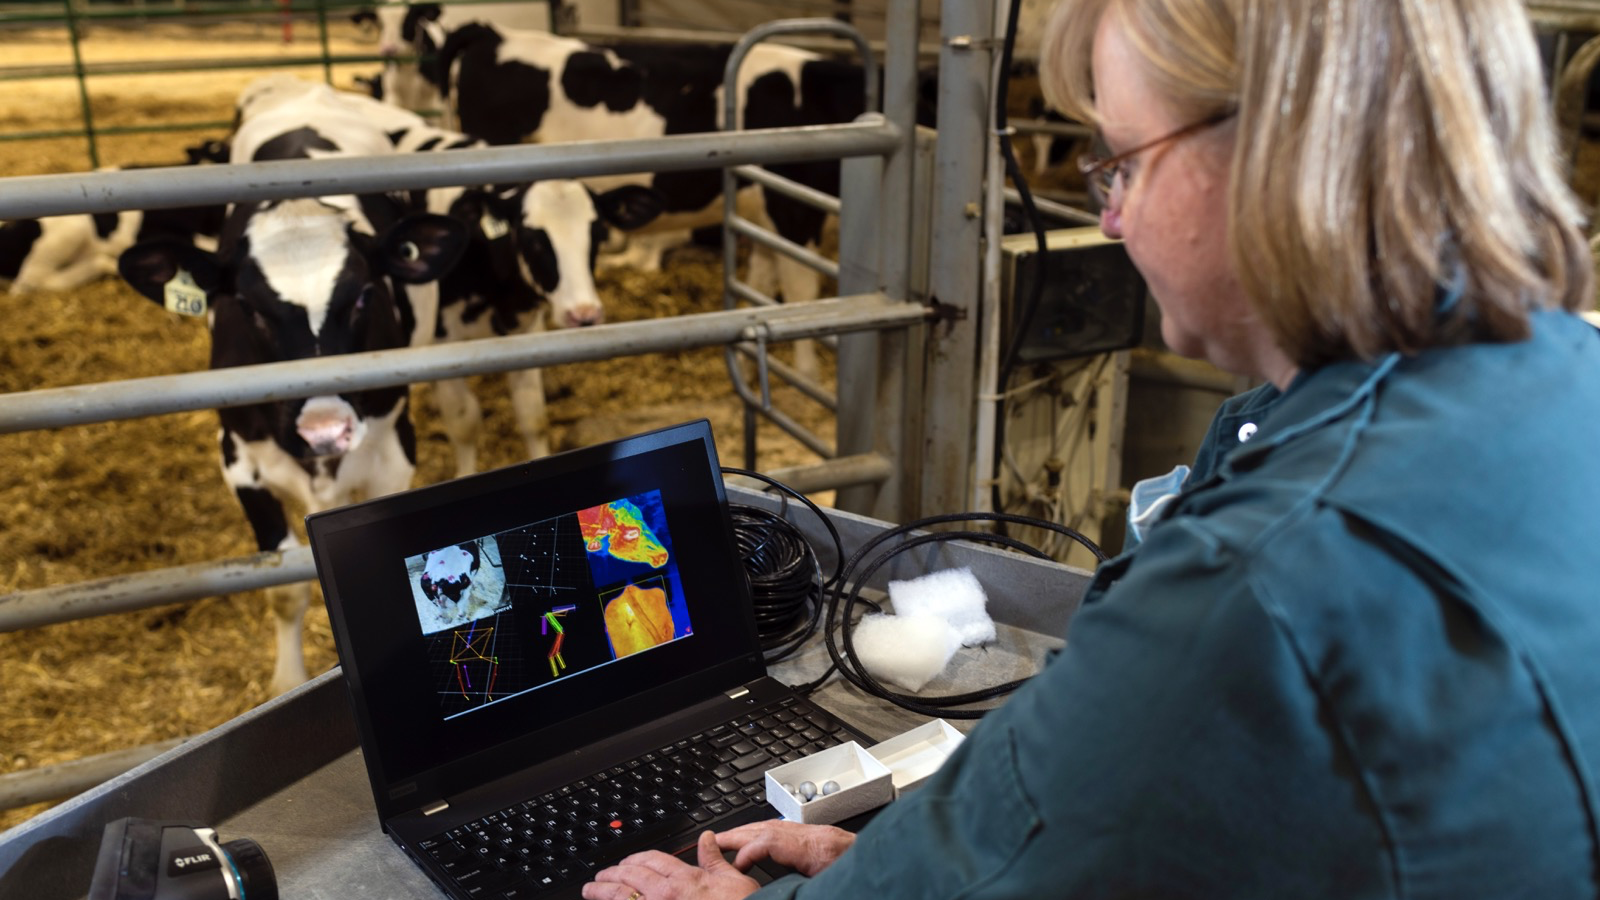 Researcher working on computer in cow barn, with cows in background.